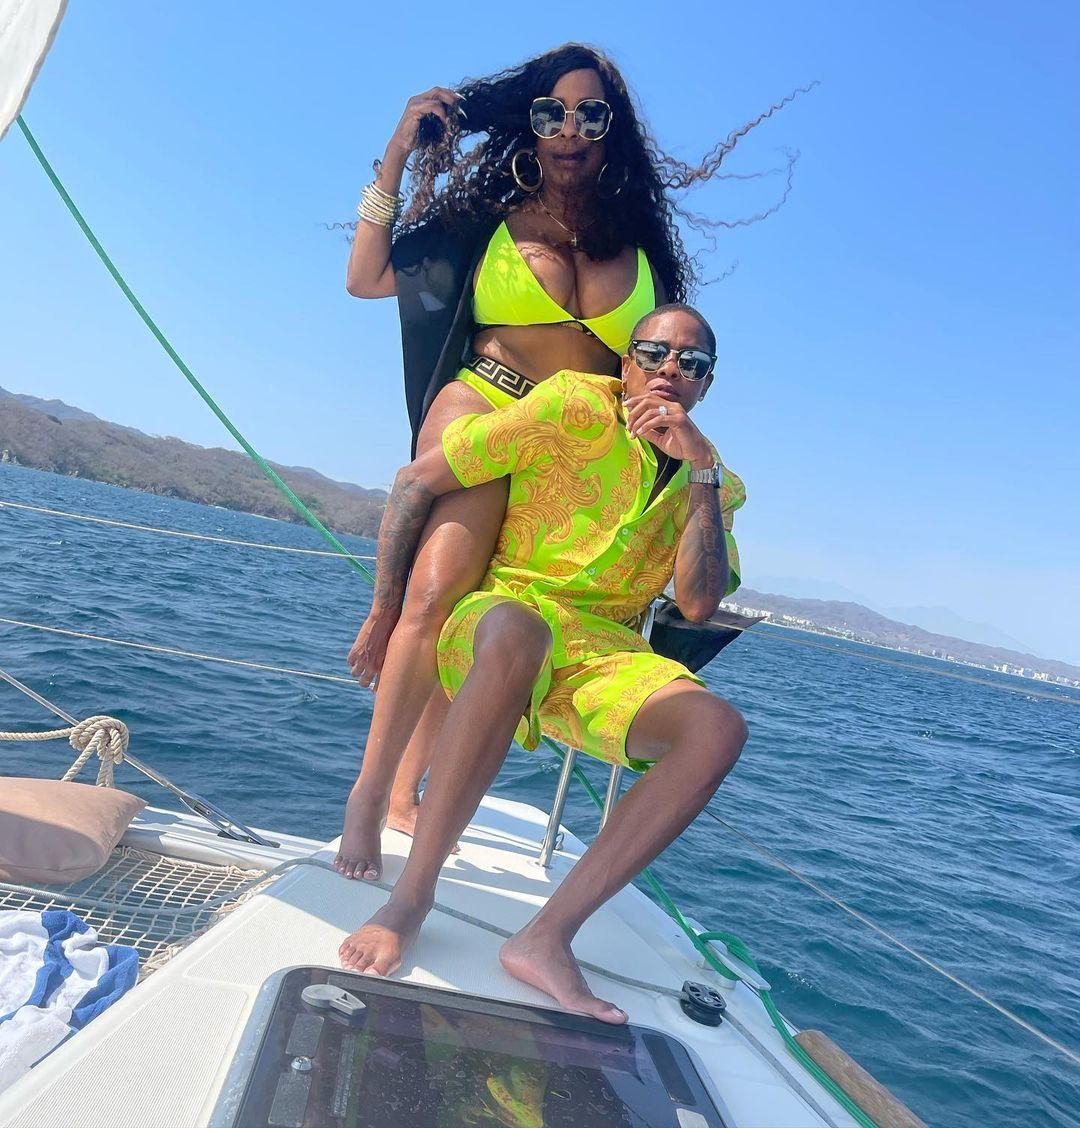 Niecy Nash 'Goes Hard' For Wife Jessica Betts' 41st Birthday With New Whip And Cruise